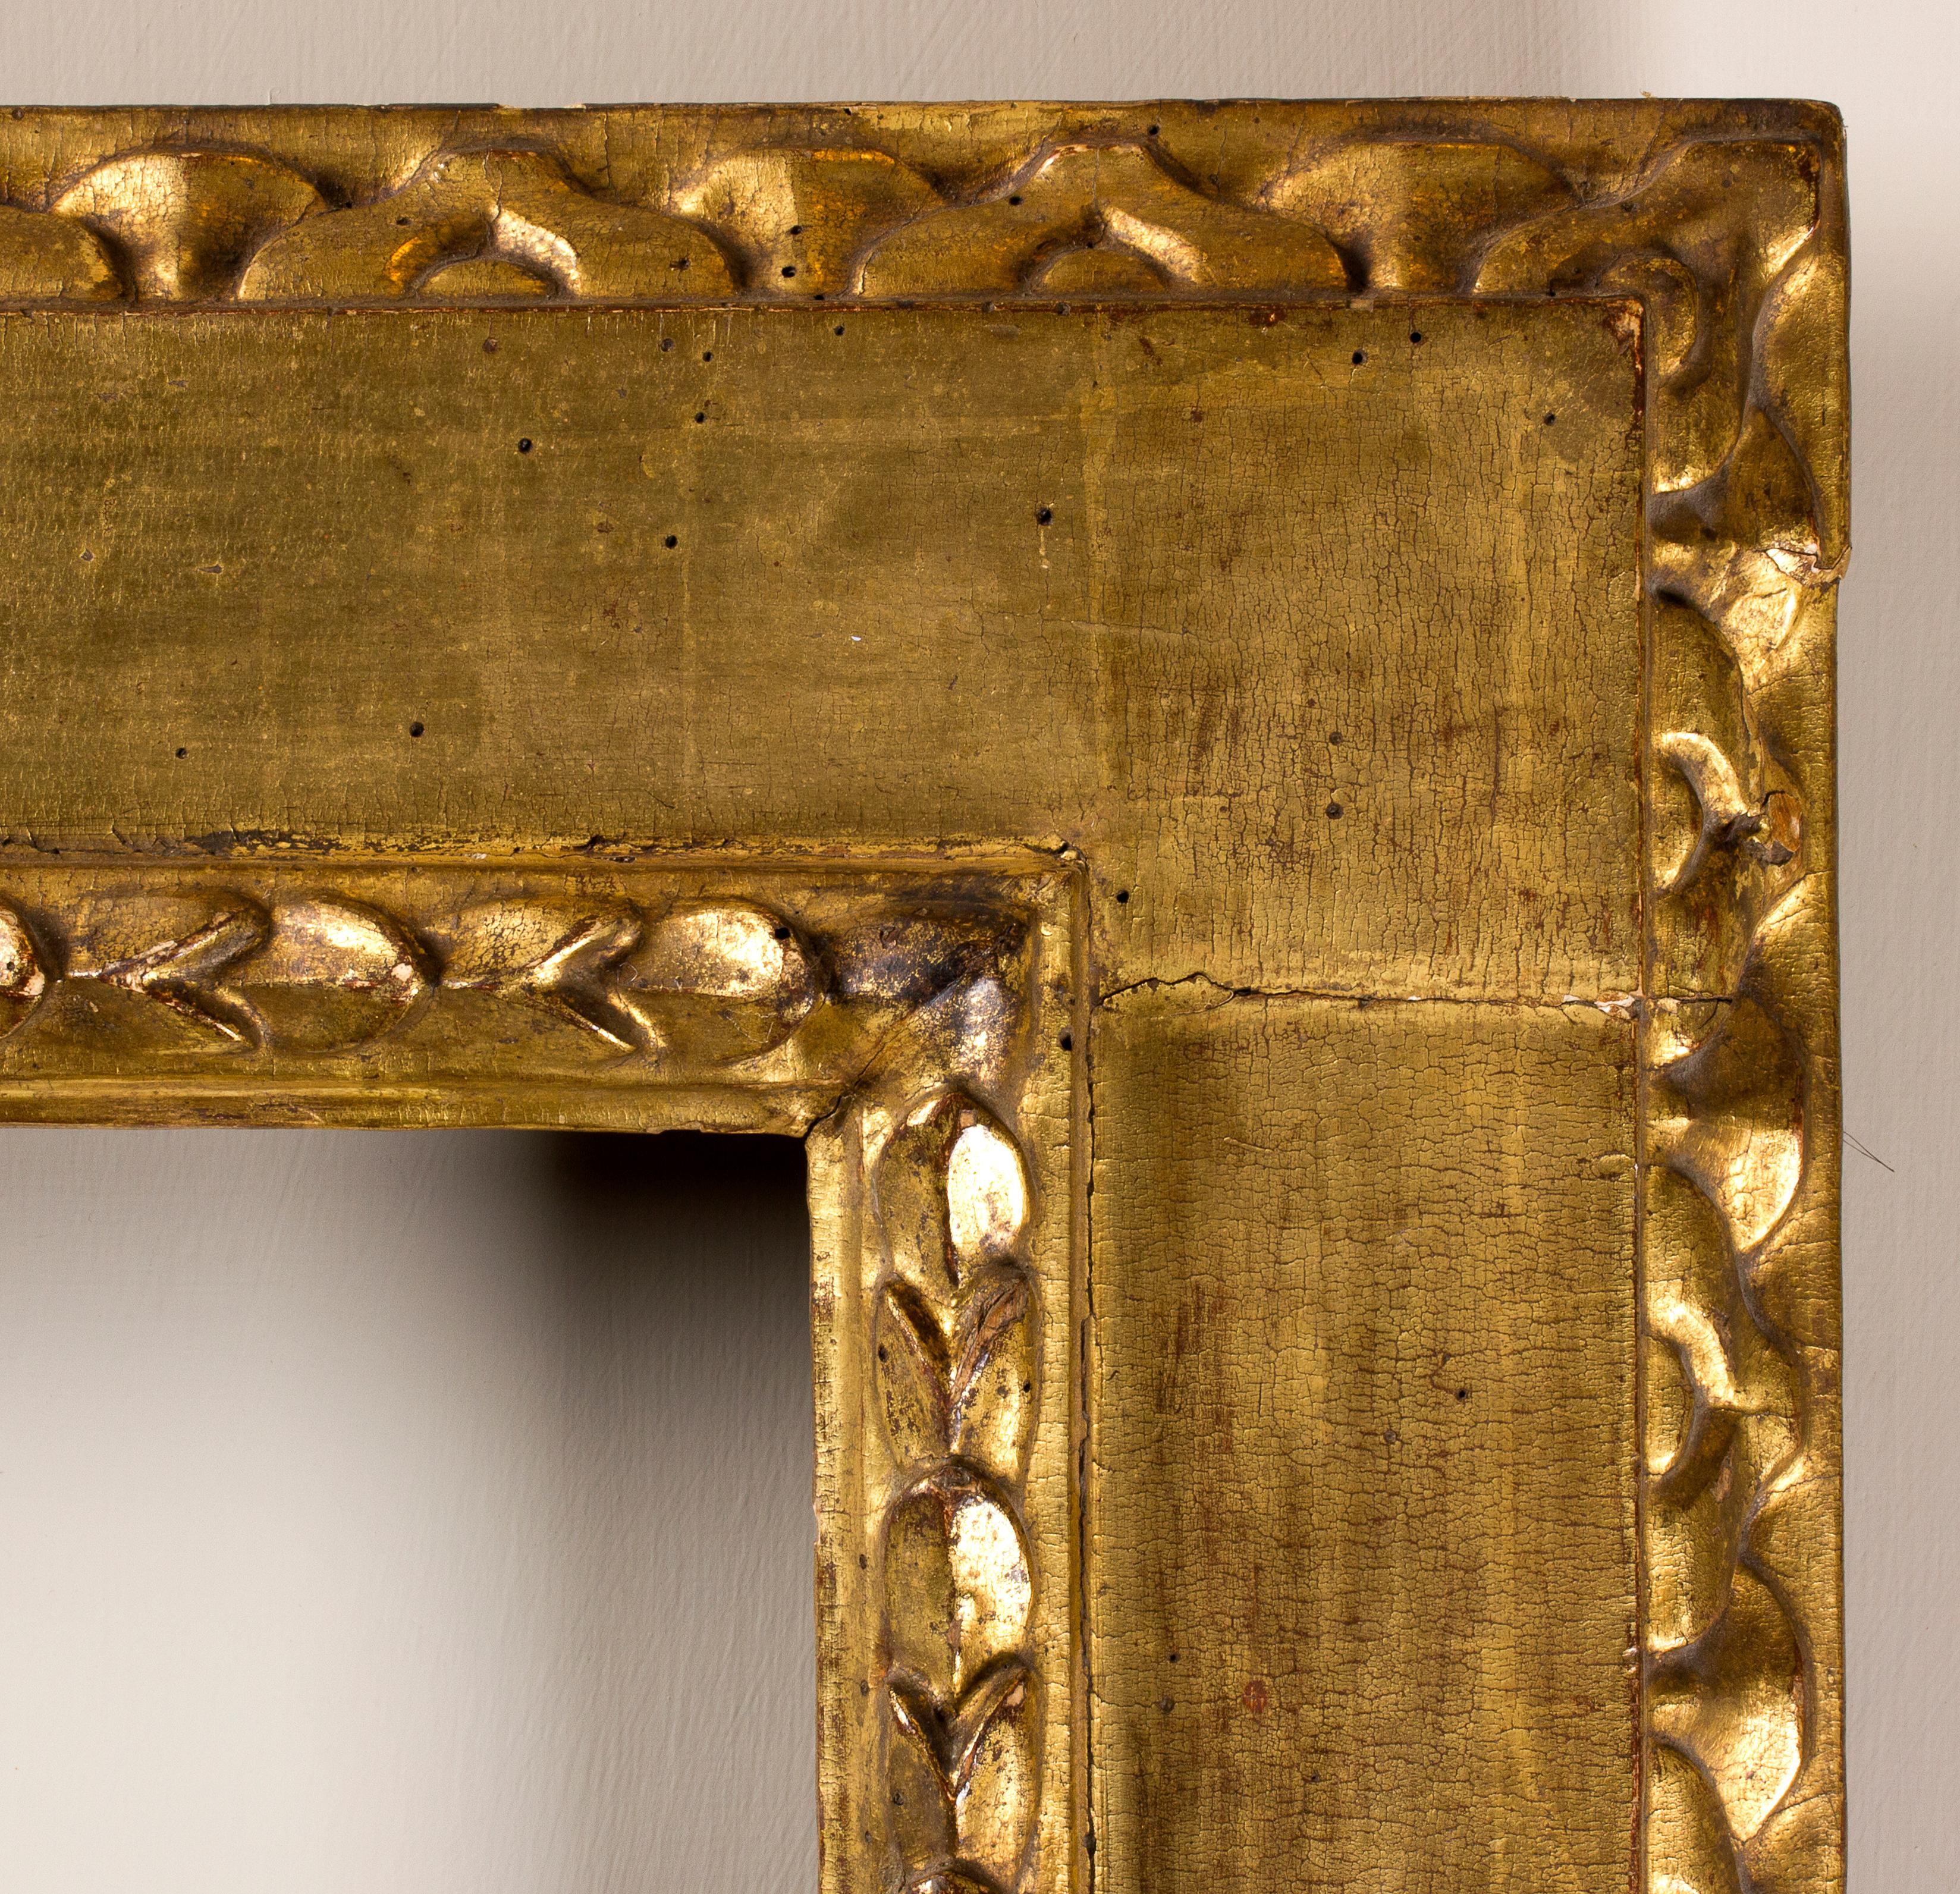 Emilia frame, end of 16th century
Golden cassetta frame carved with recurring leaves motif and with leaf and leaflet pattern.
Luce: 34.2 x 44.5 cm; ingombro: 57.2 x 67.5 cm.
Depth is the wide of the band.
 